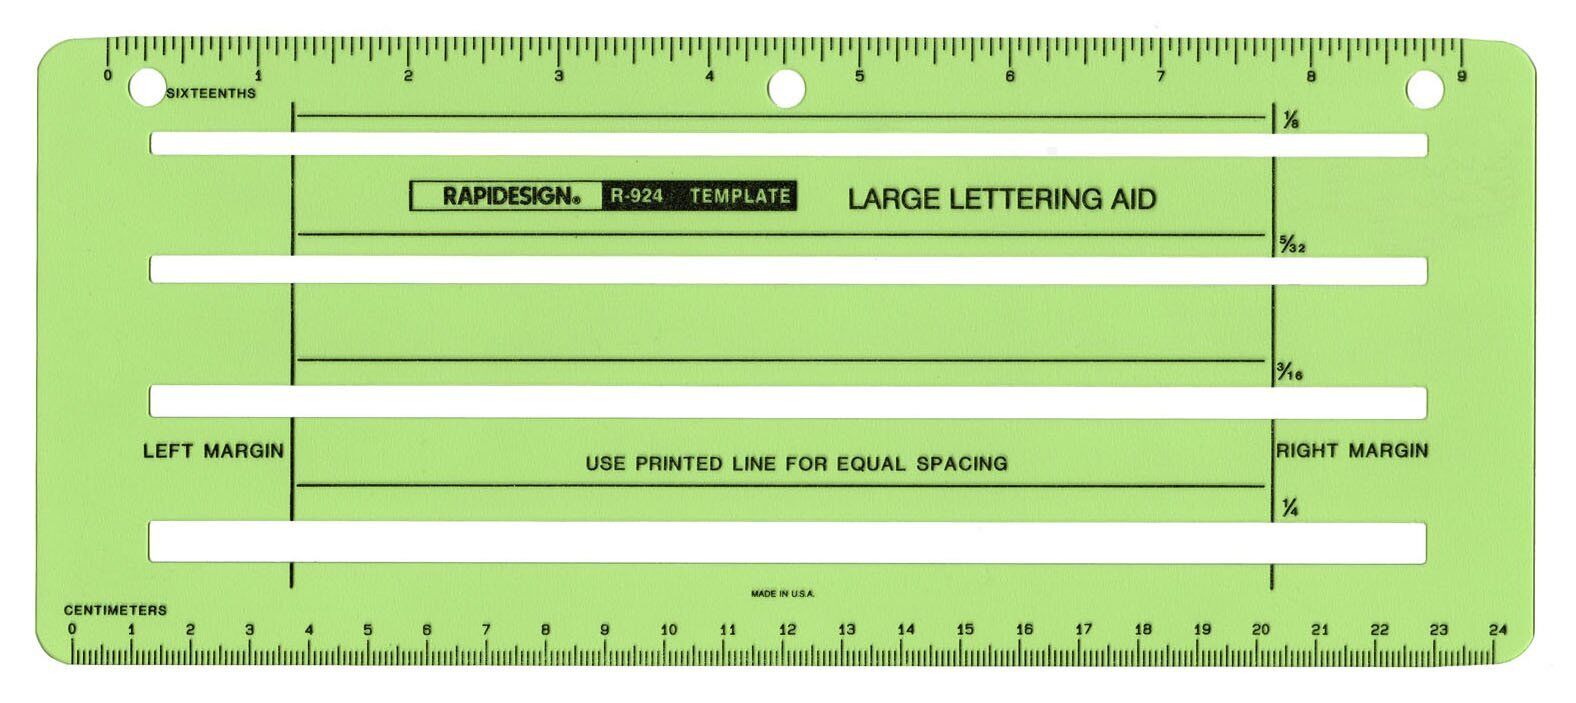 Large Lettering Aid Template, 1 Each (R924)